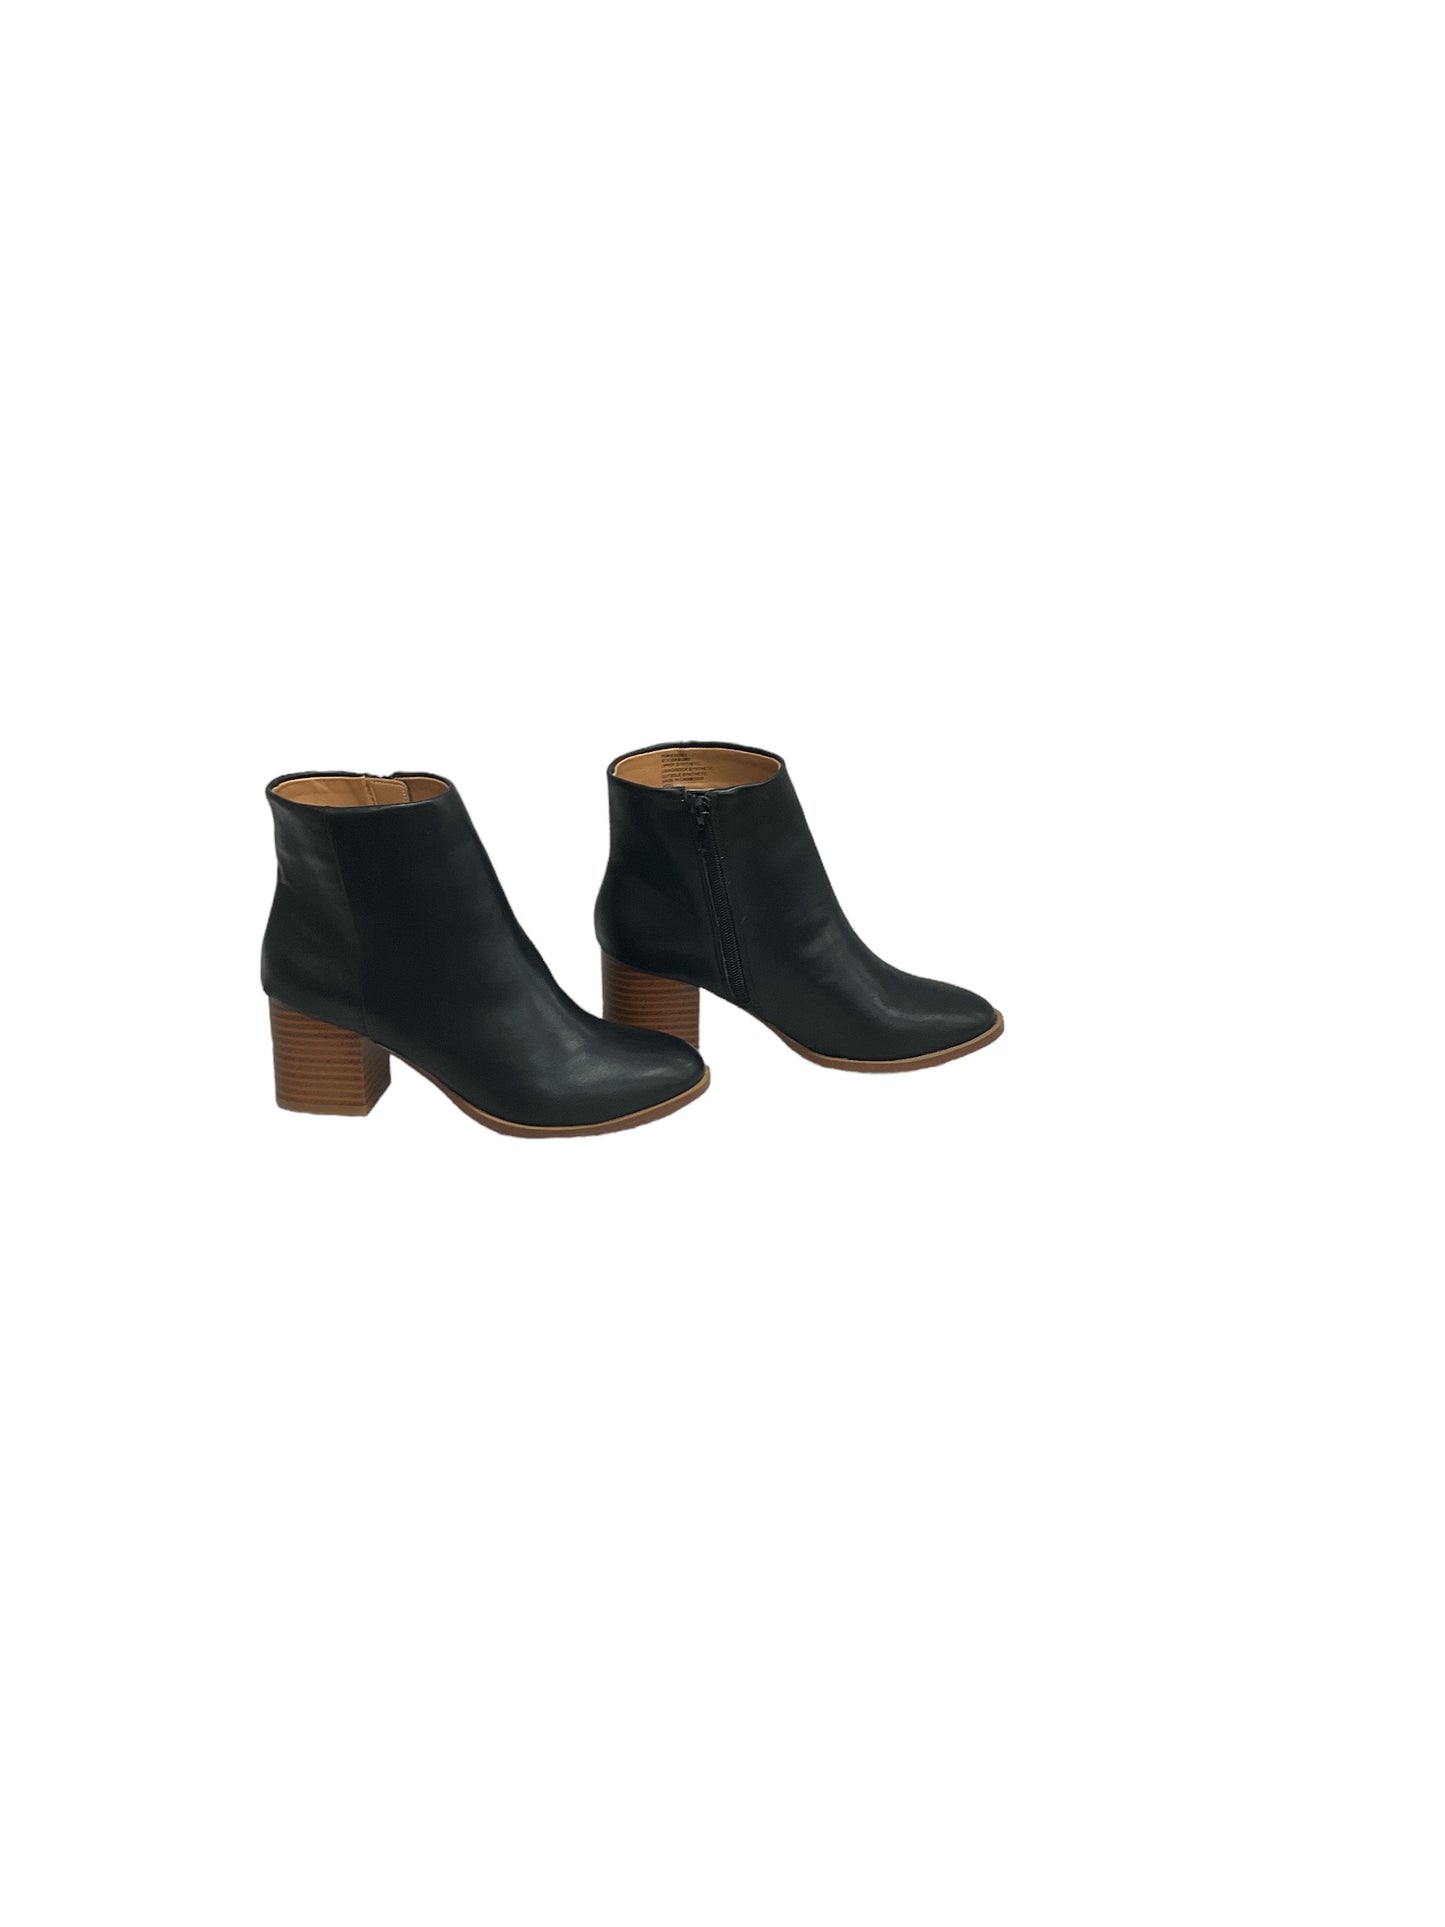 Boots Ankle Heels By J Crew  Size: 5.5